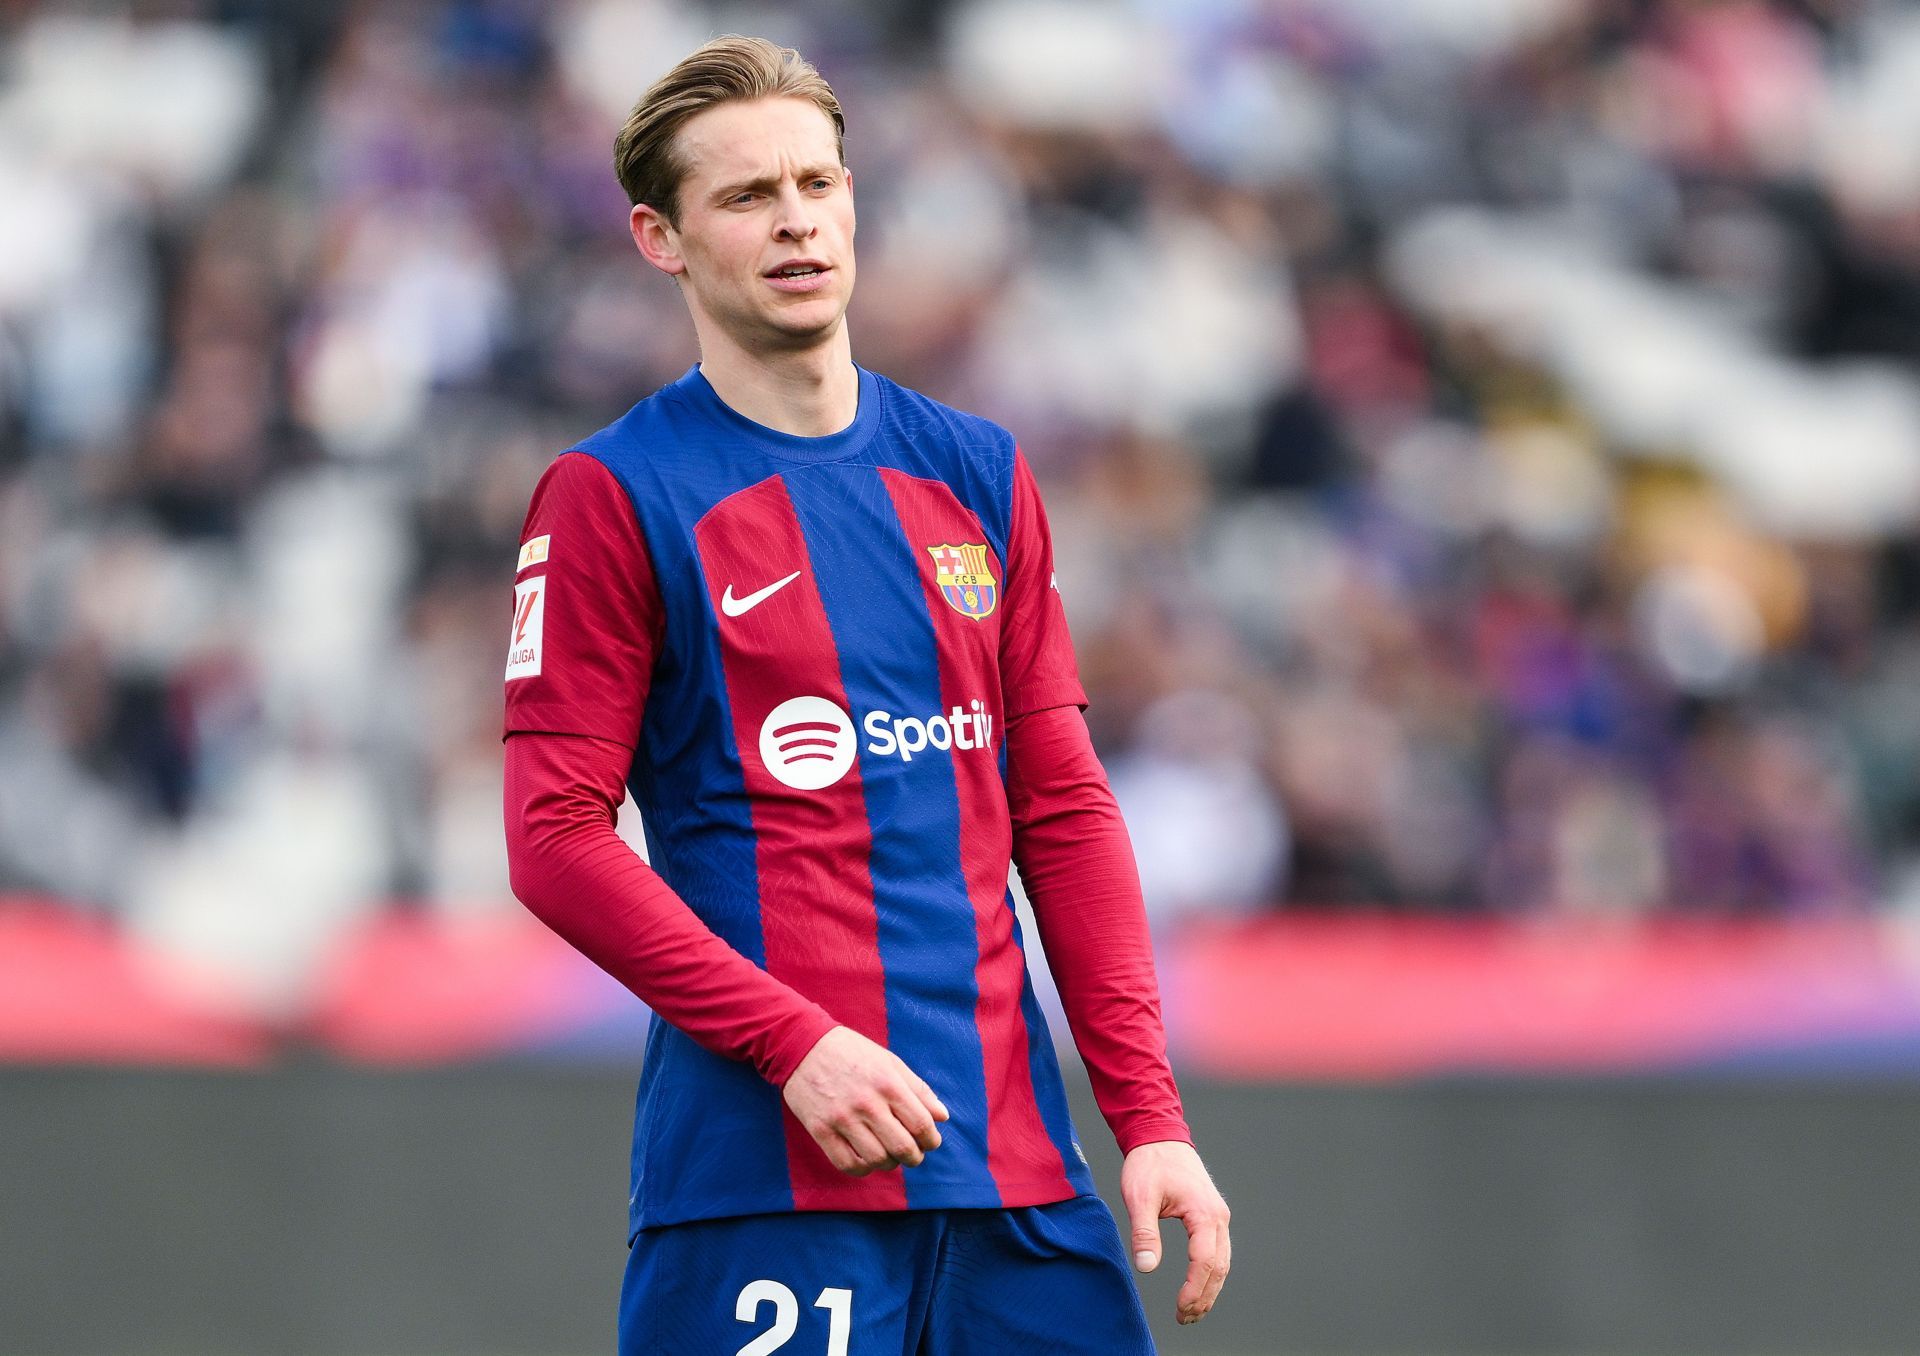 Frenkie de Jong could leave the Camp Nou this summer